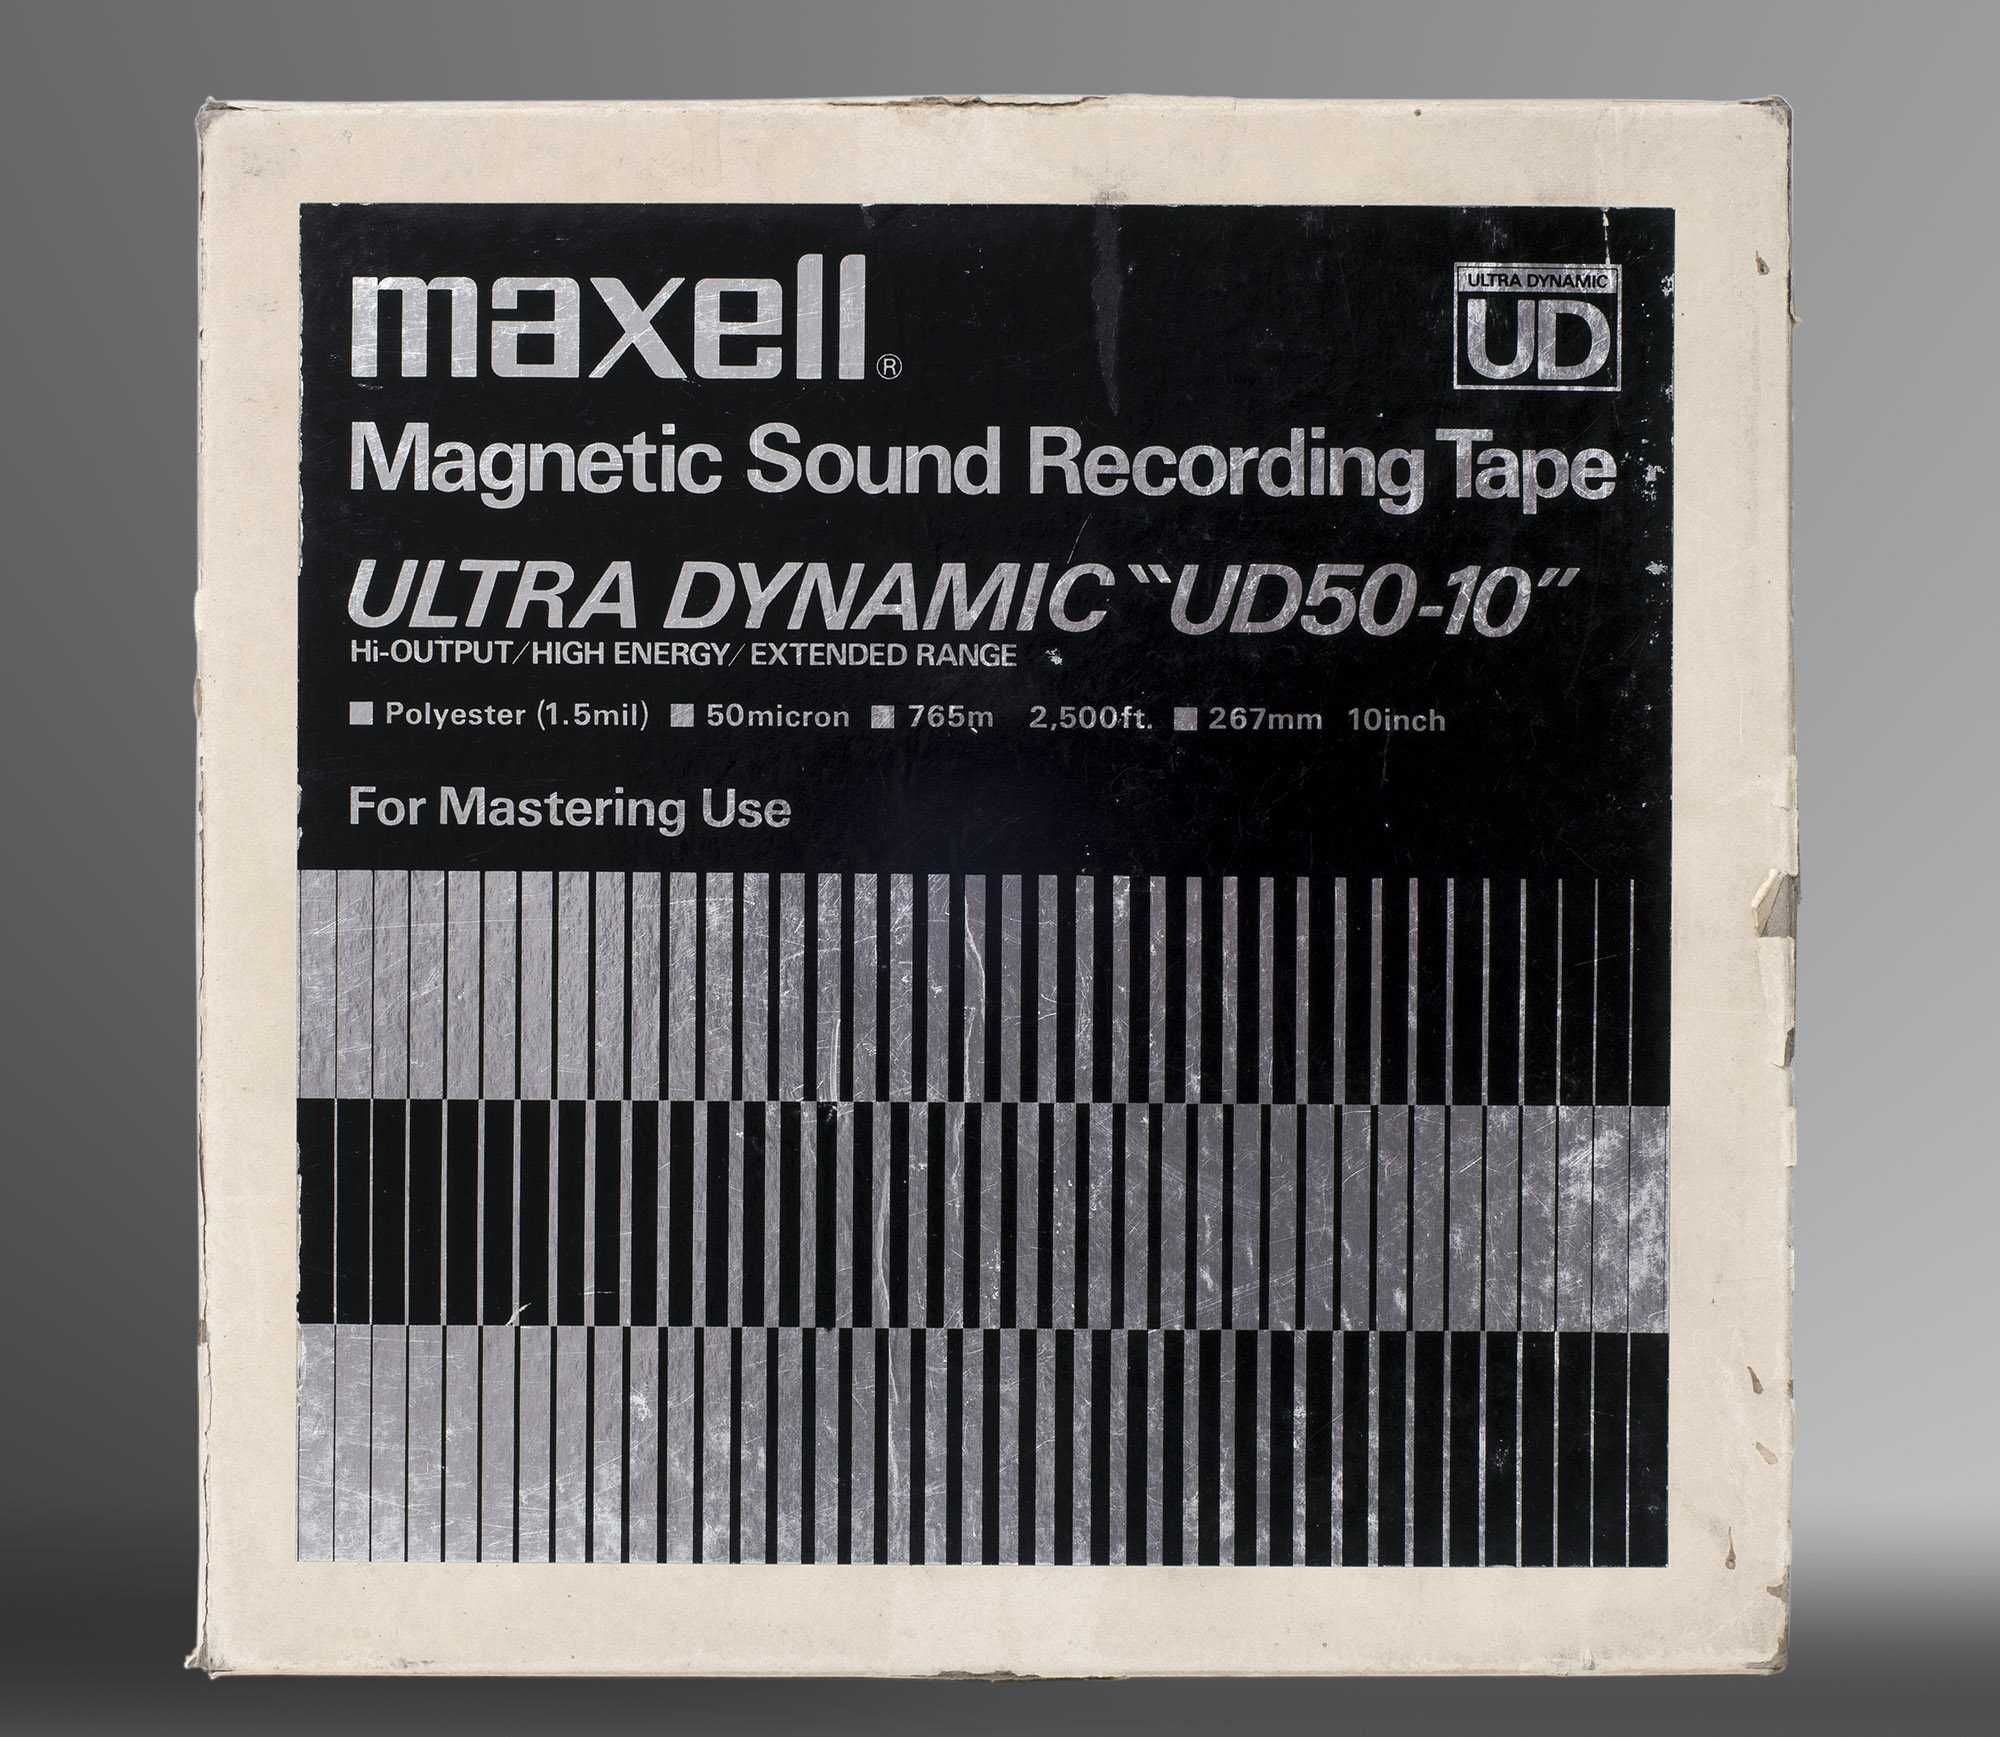 Катушка (бобина) MAXELL "UD50-10" ( made in Japan ).